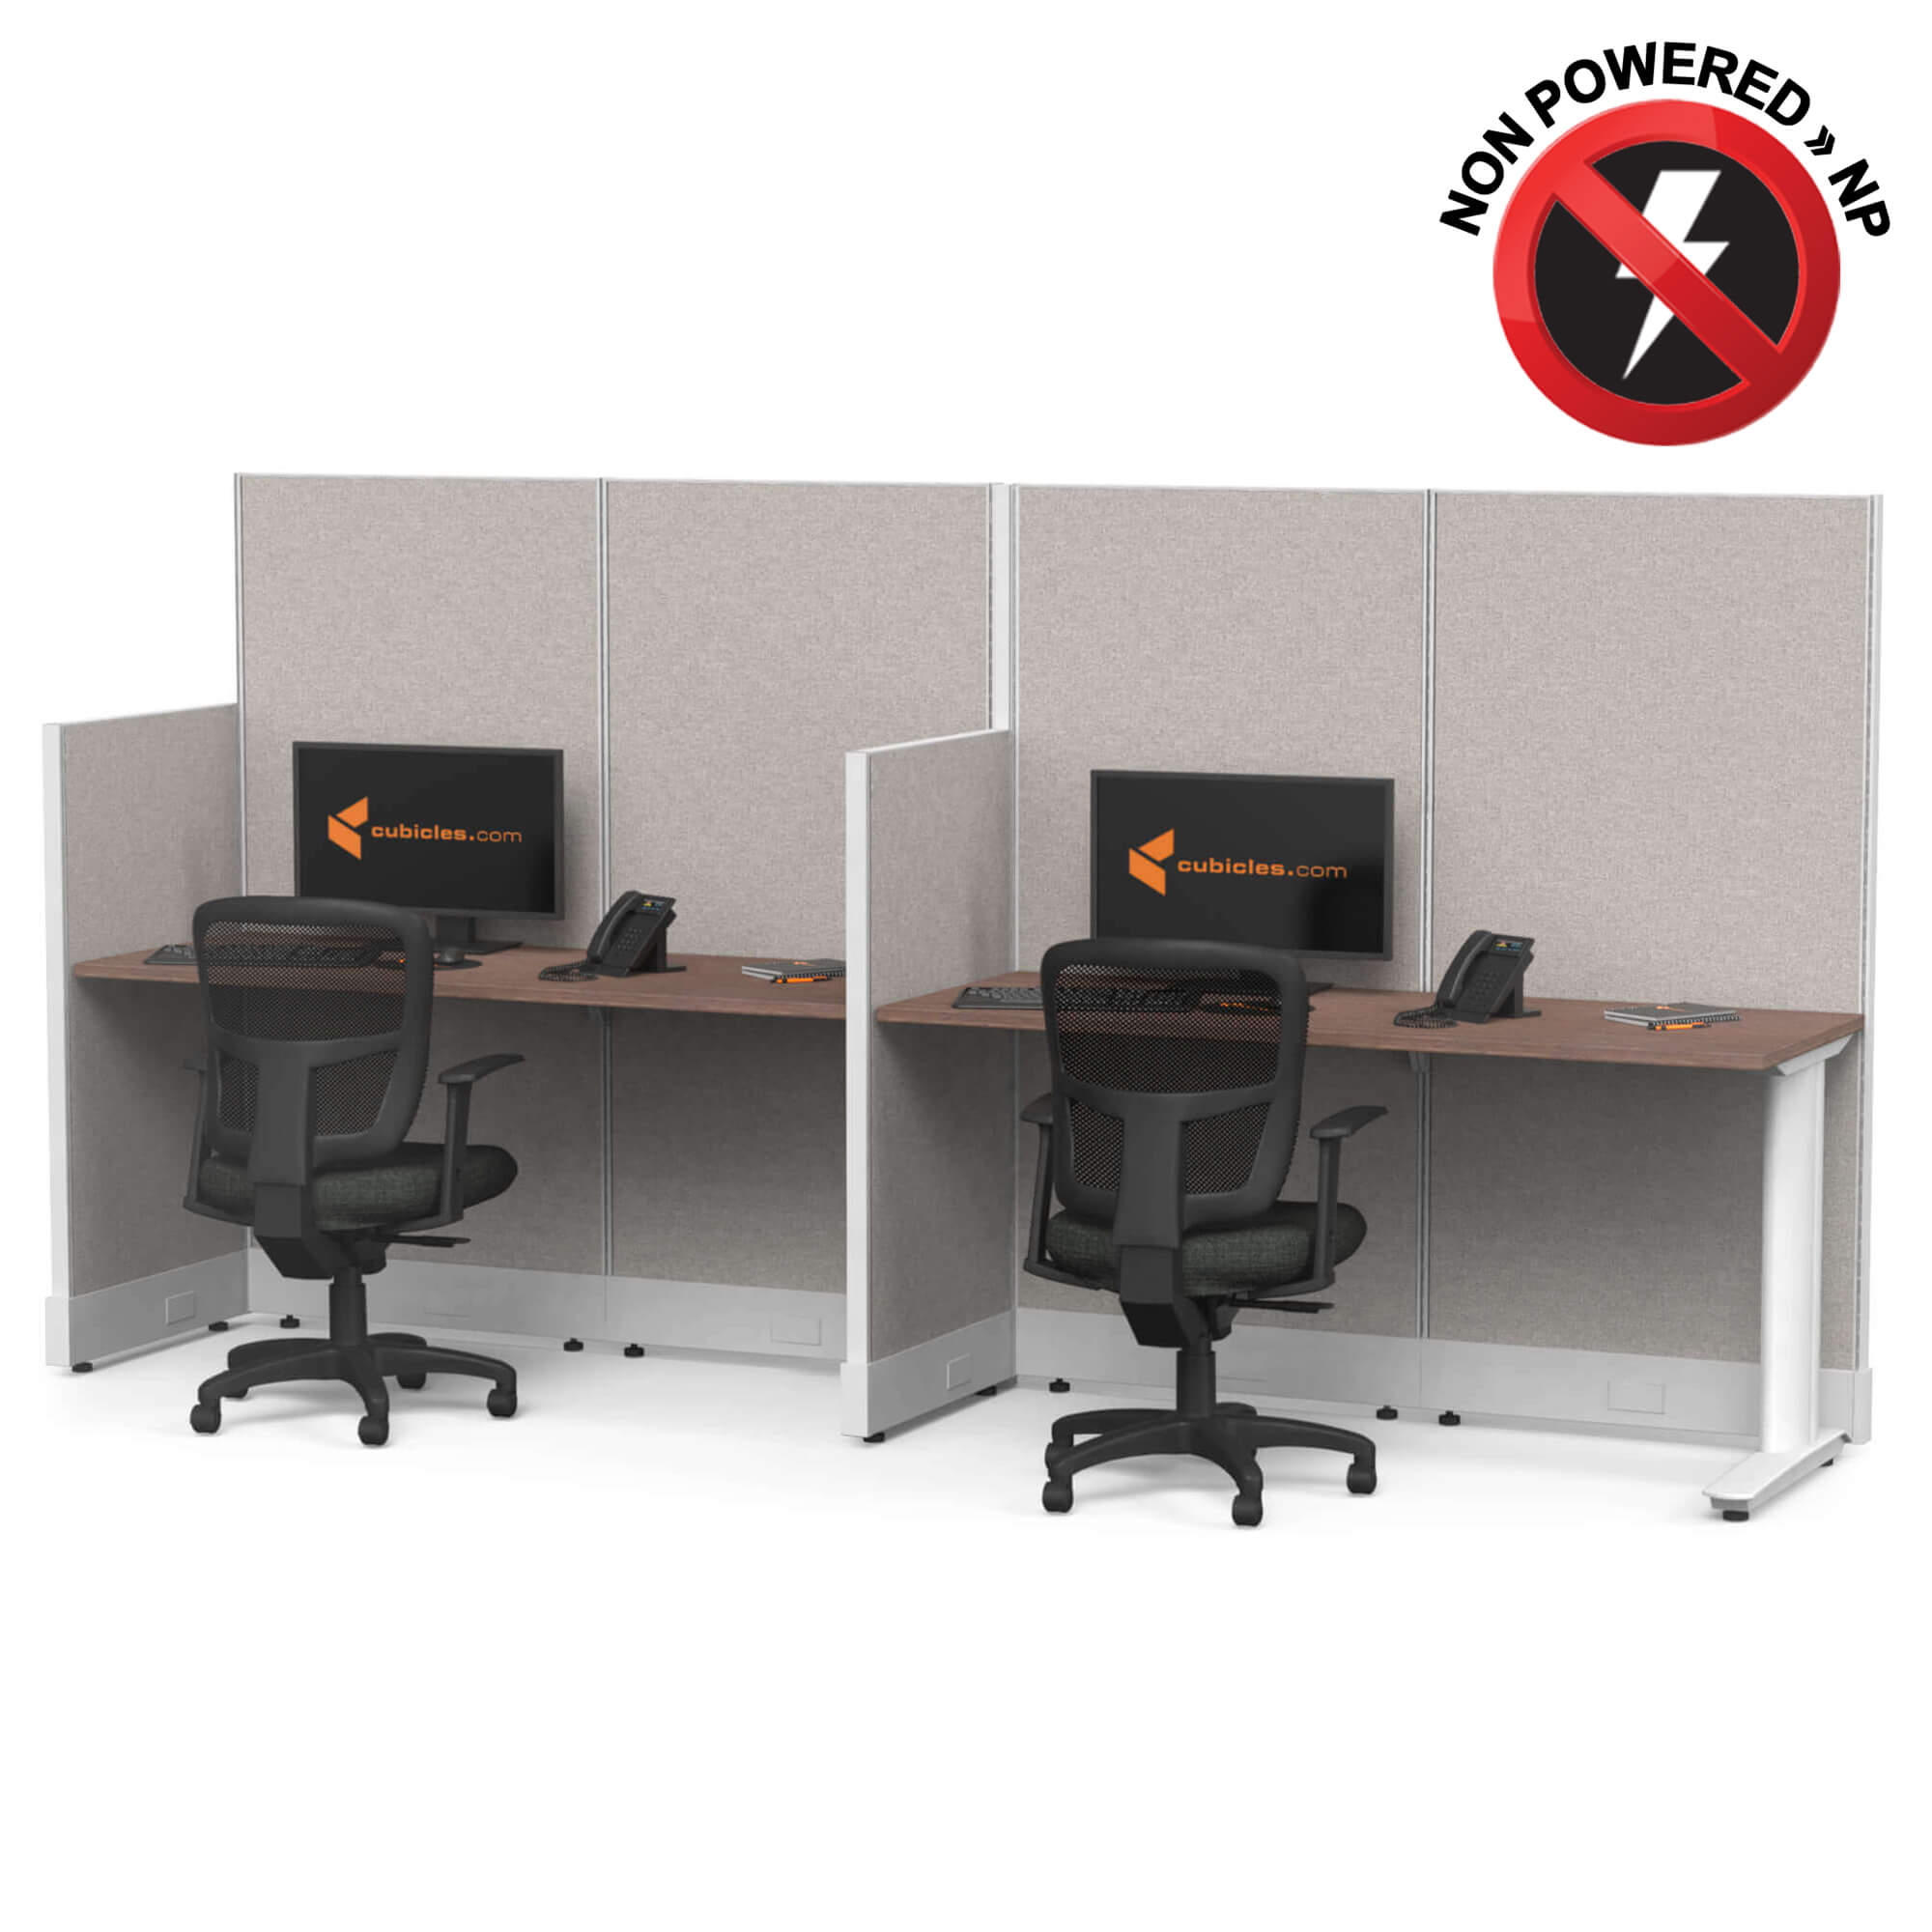 cubicle-desk-straight-workstation-2pack-inline-non-powered-sign-1-2.jpg